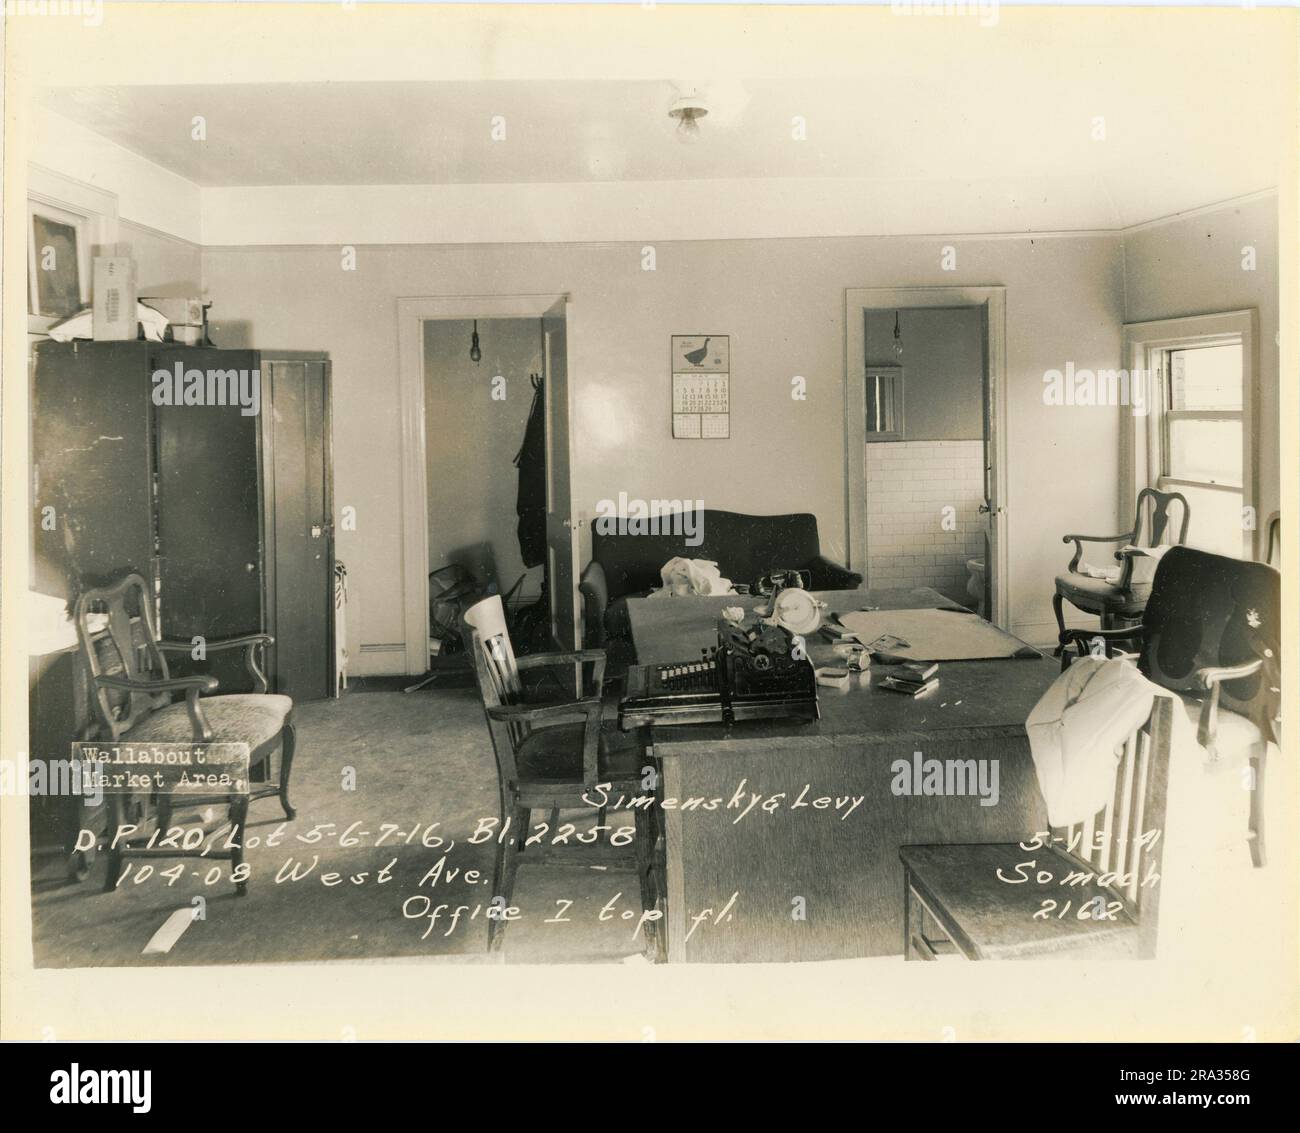 Photograph of interior of lots 5-6-7-16, Bl. 2258, 104-08 West Ave, office on top floor of Simensky & Levy, D.P. 120. Stock Photo